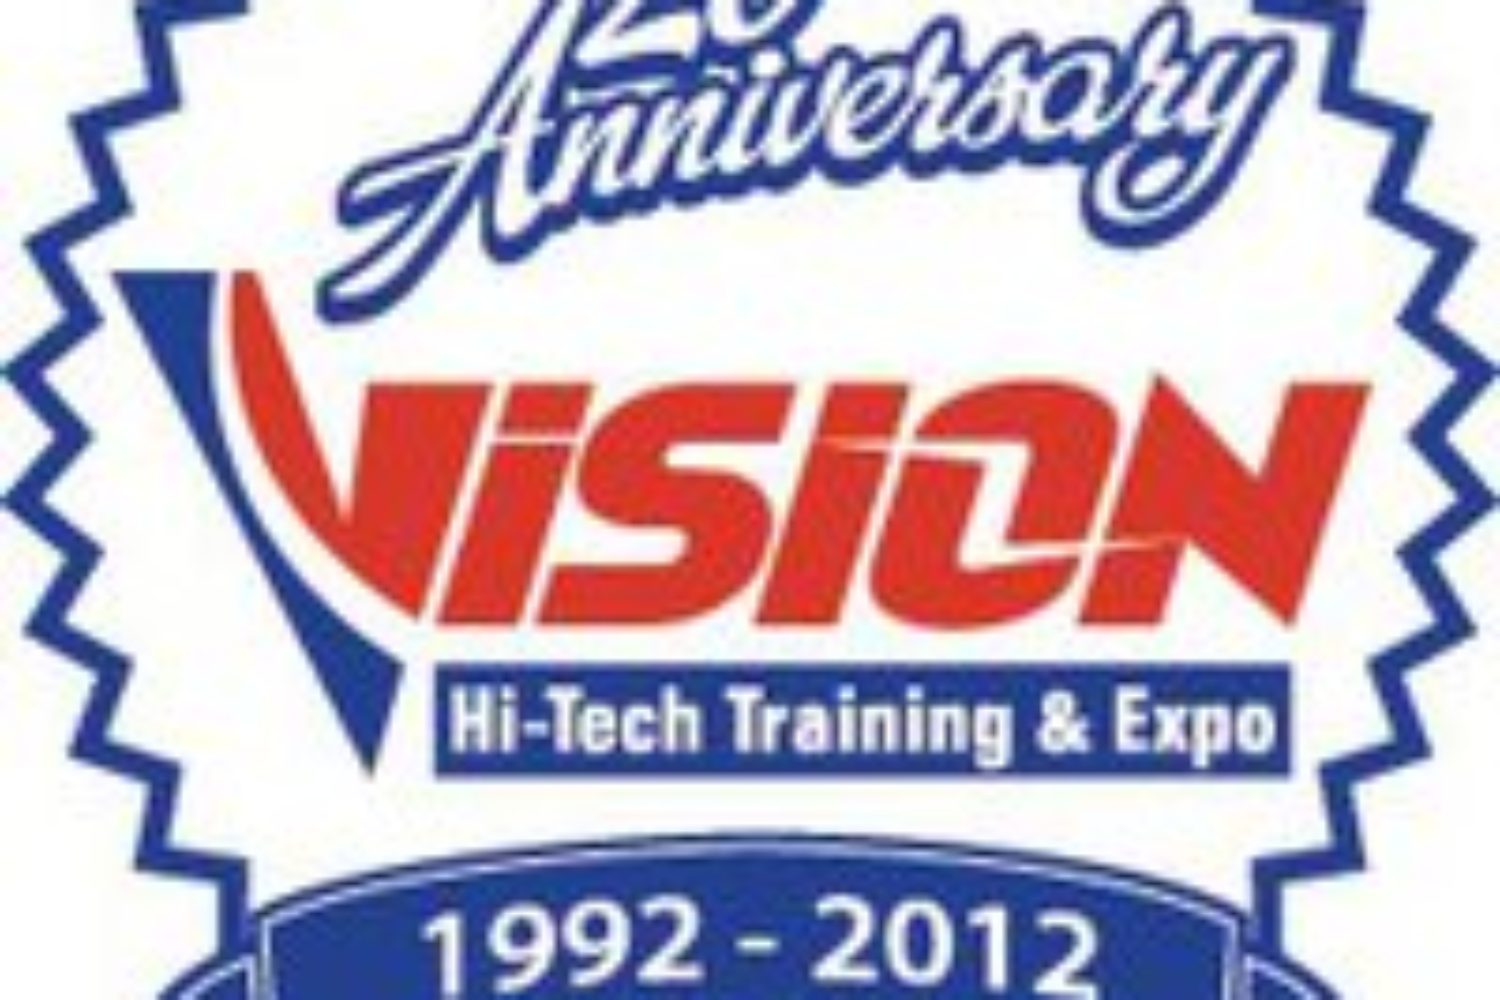 High Tech Automotive Training at Vision in Kansas City